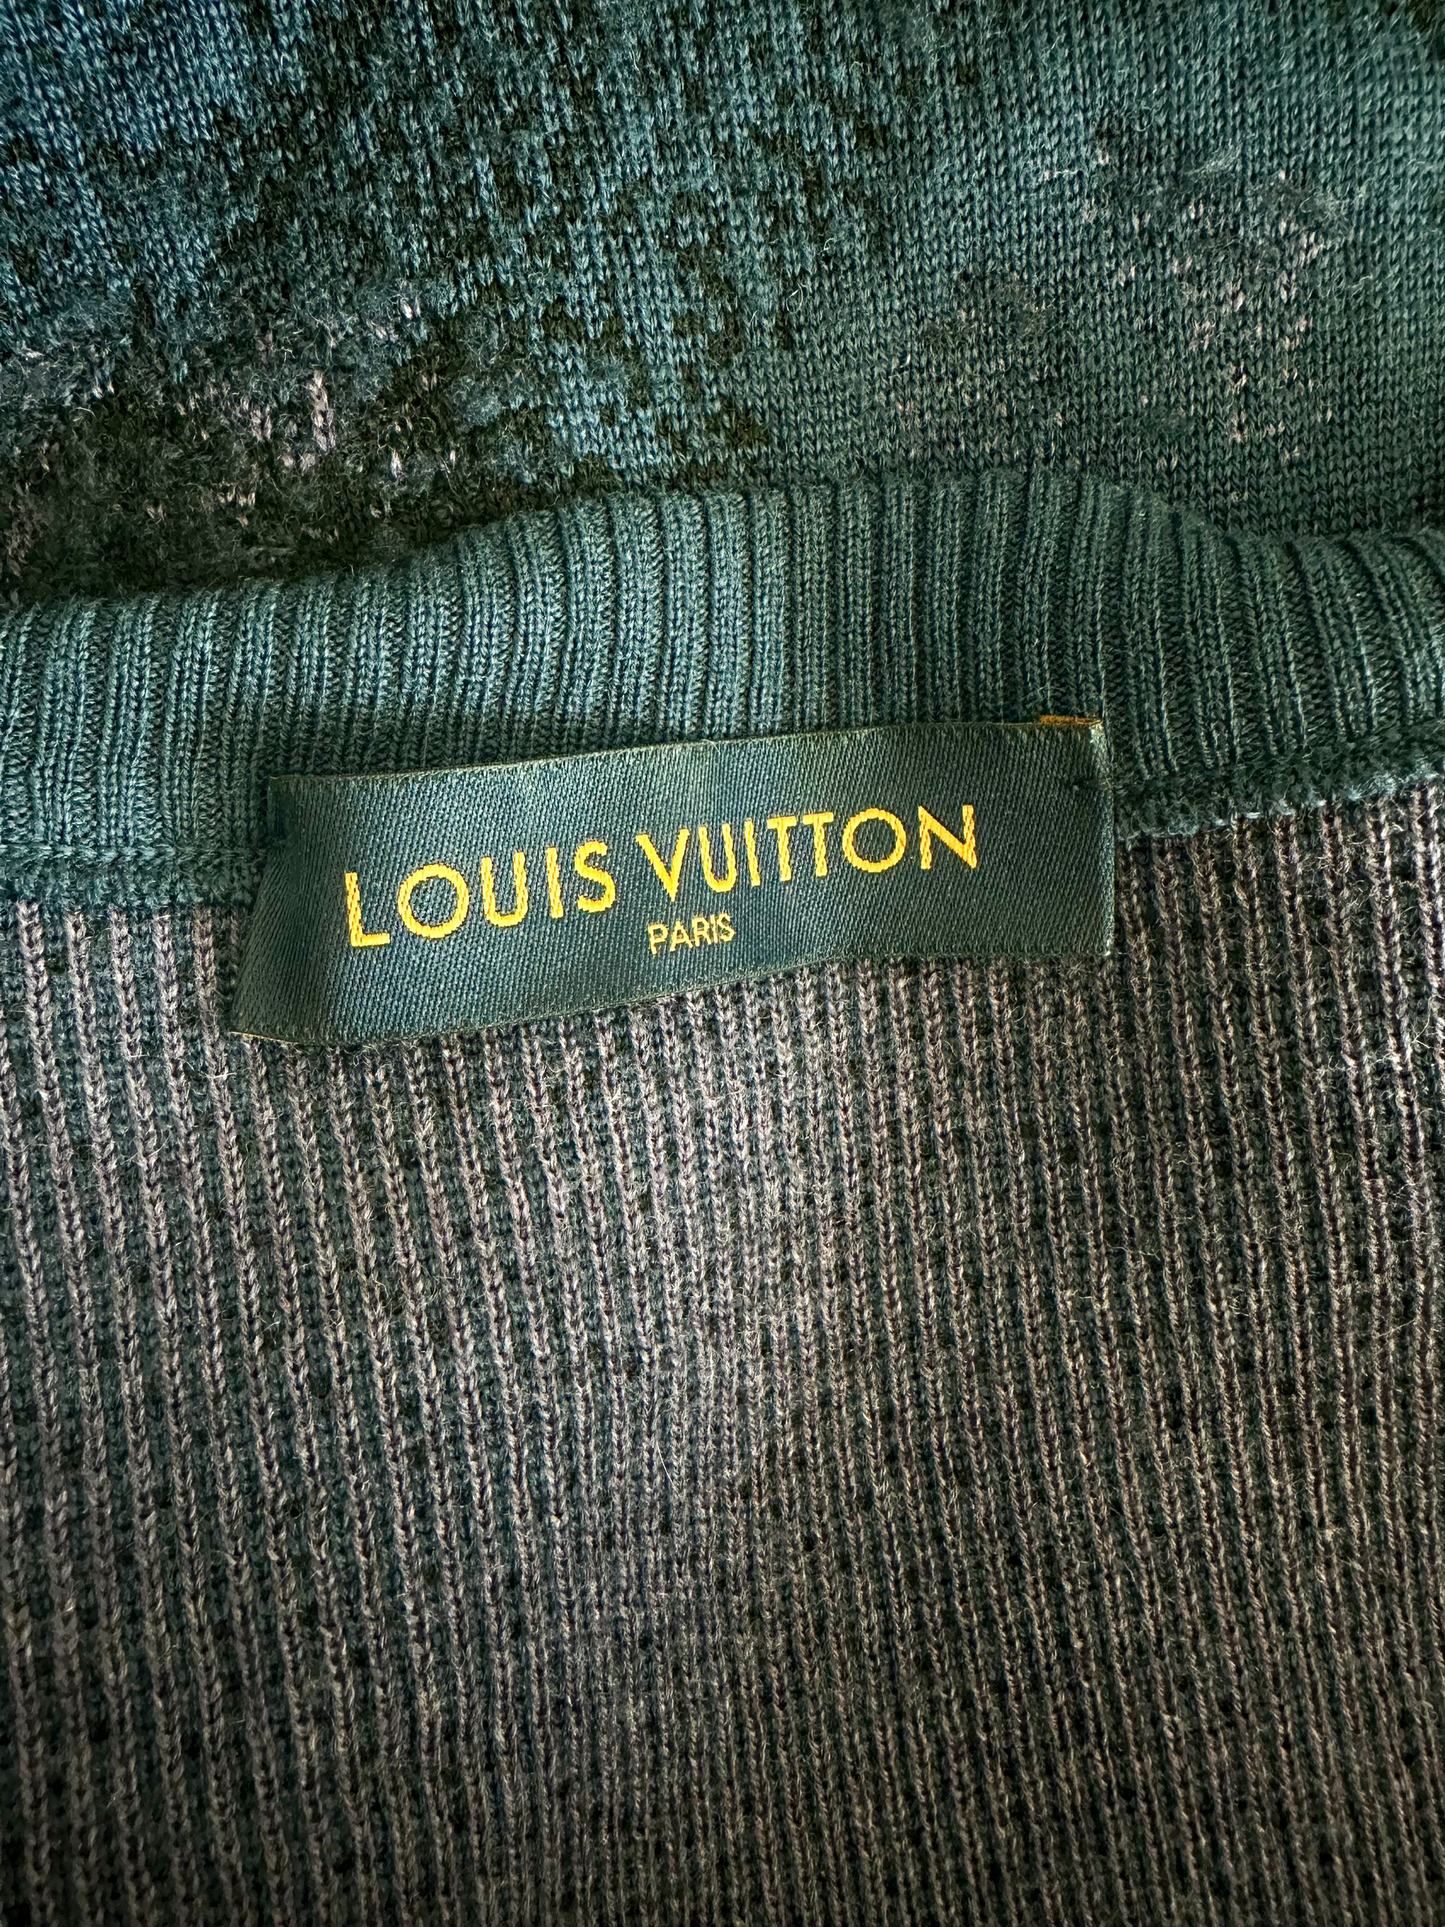 lv wizard of oz sweater